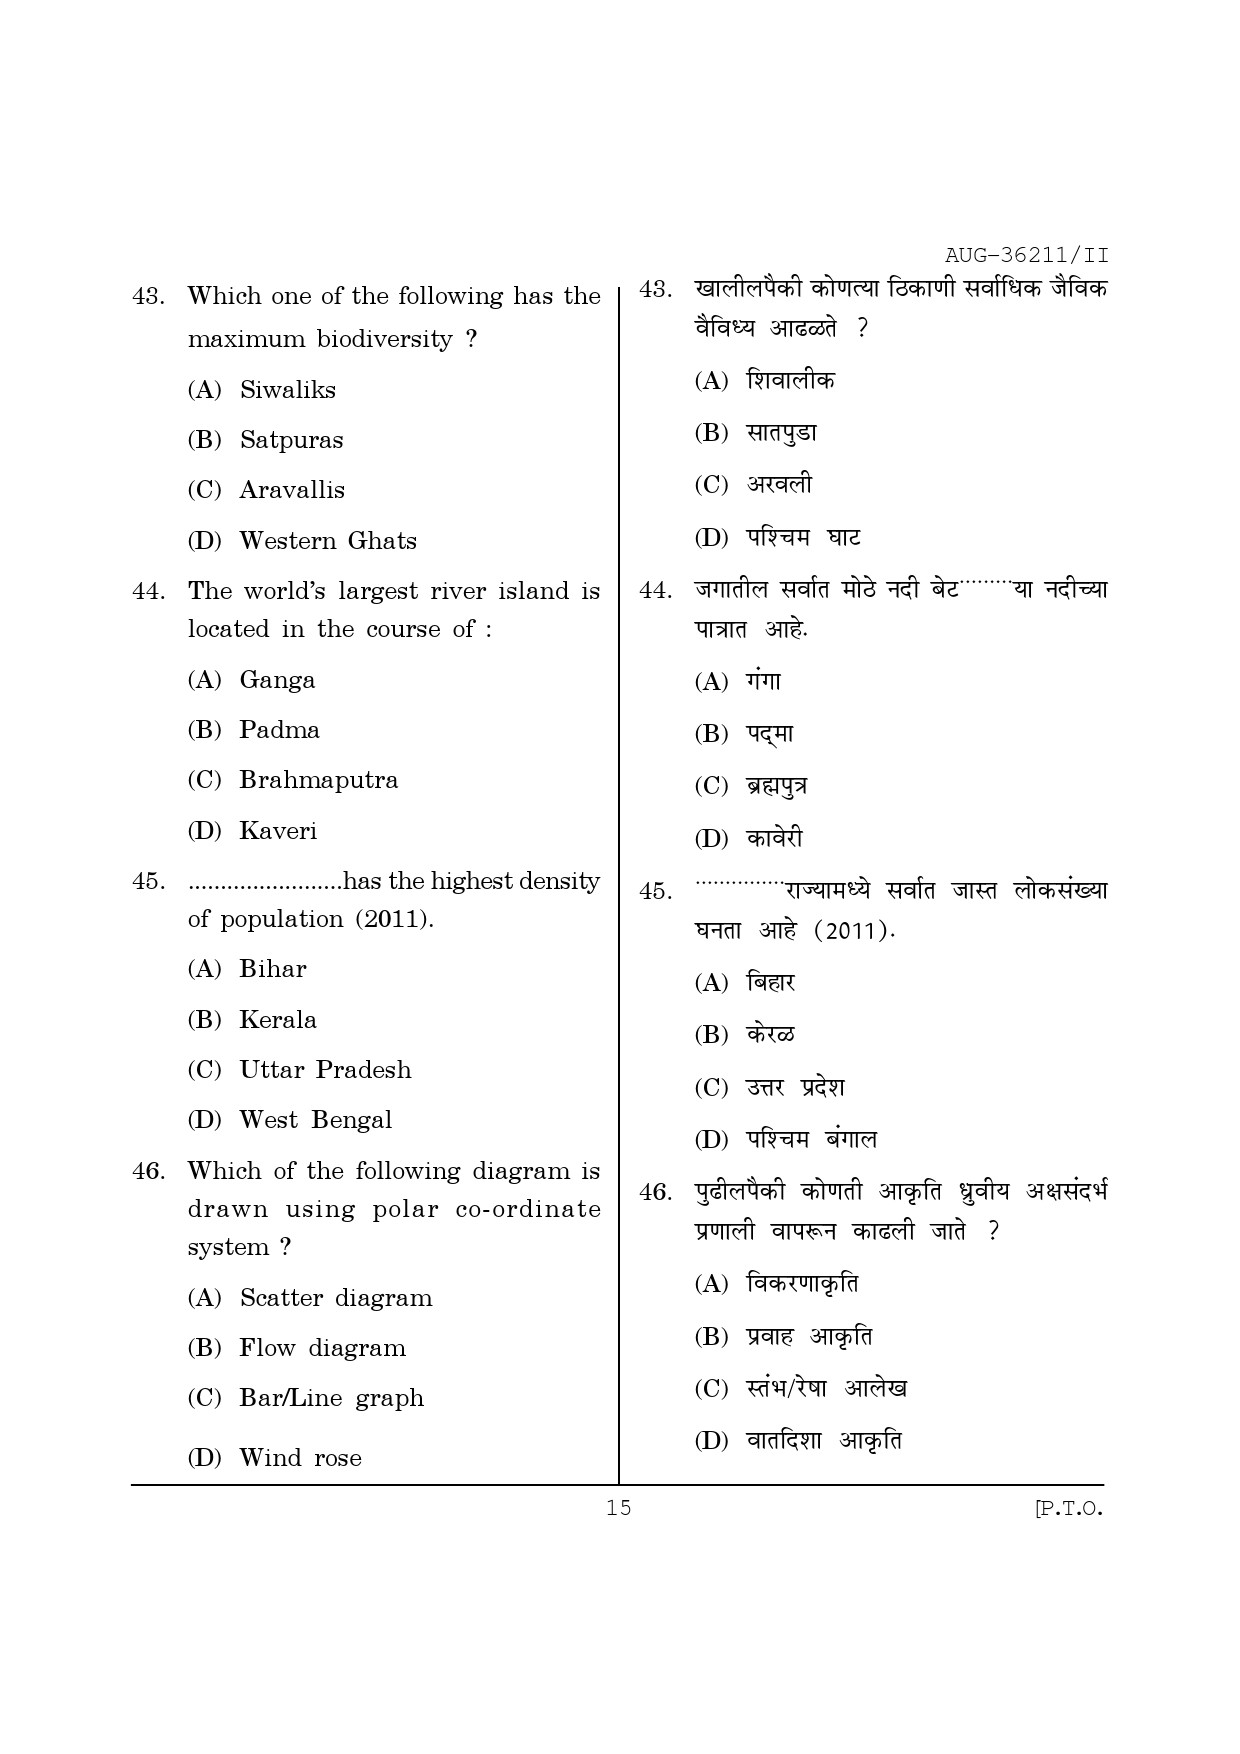 Maharashtra SET Geography Question Paper II August 2011 15